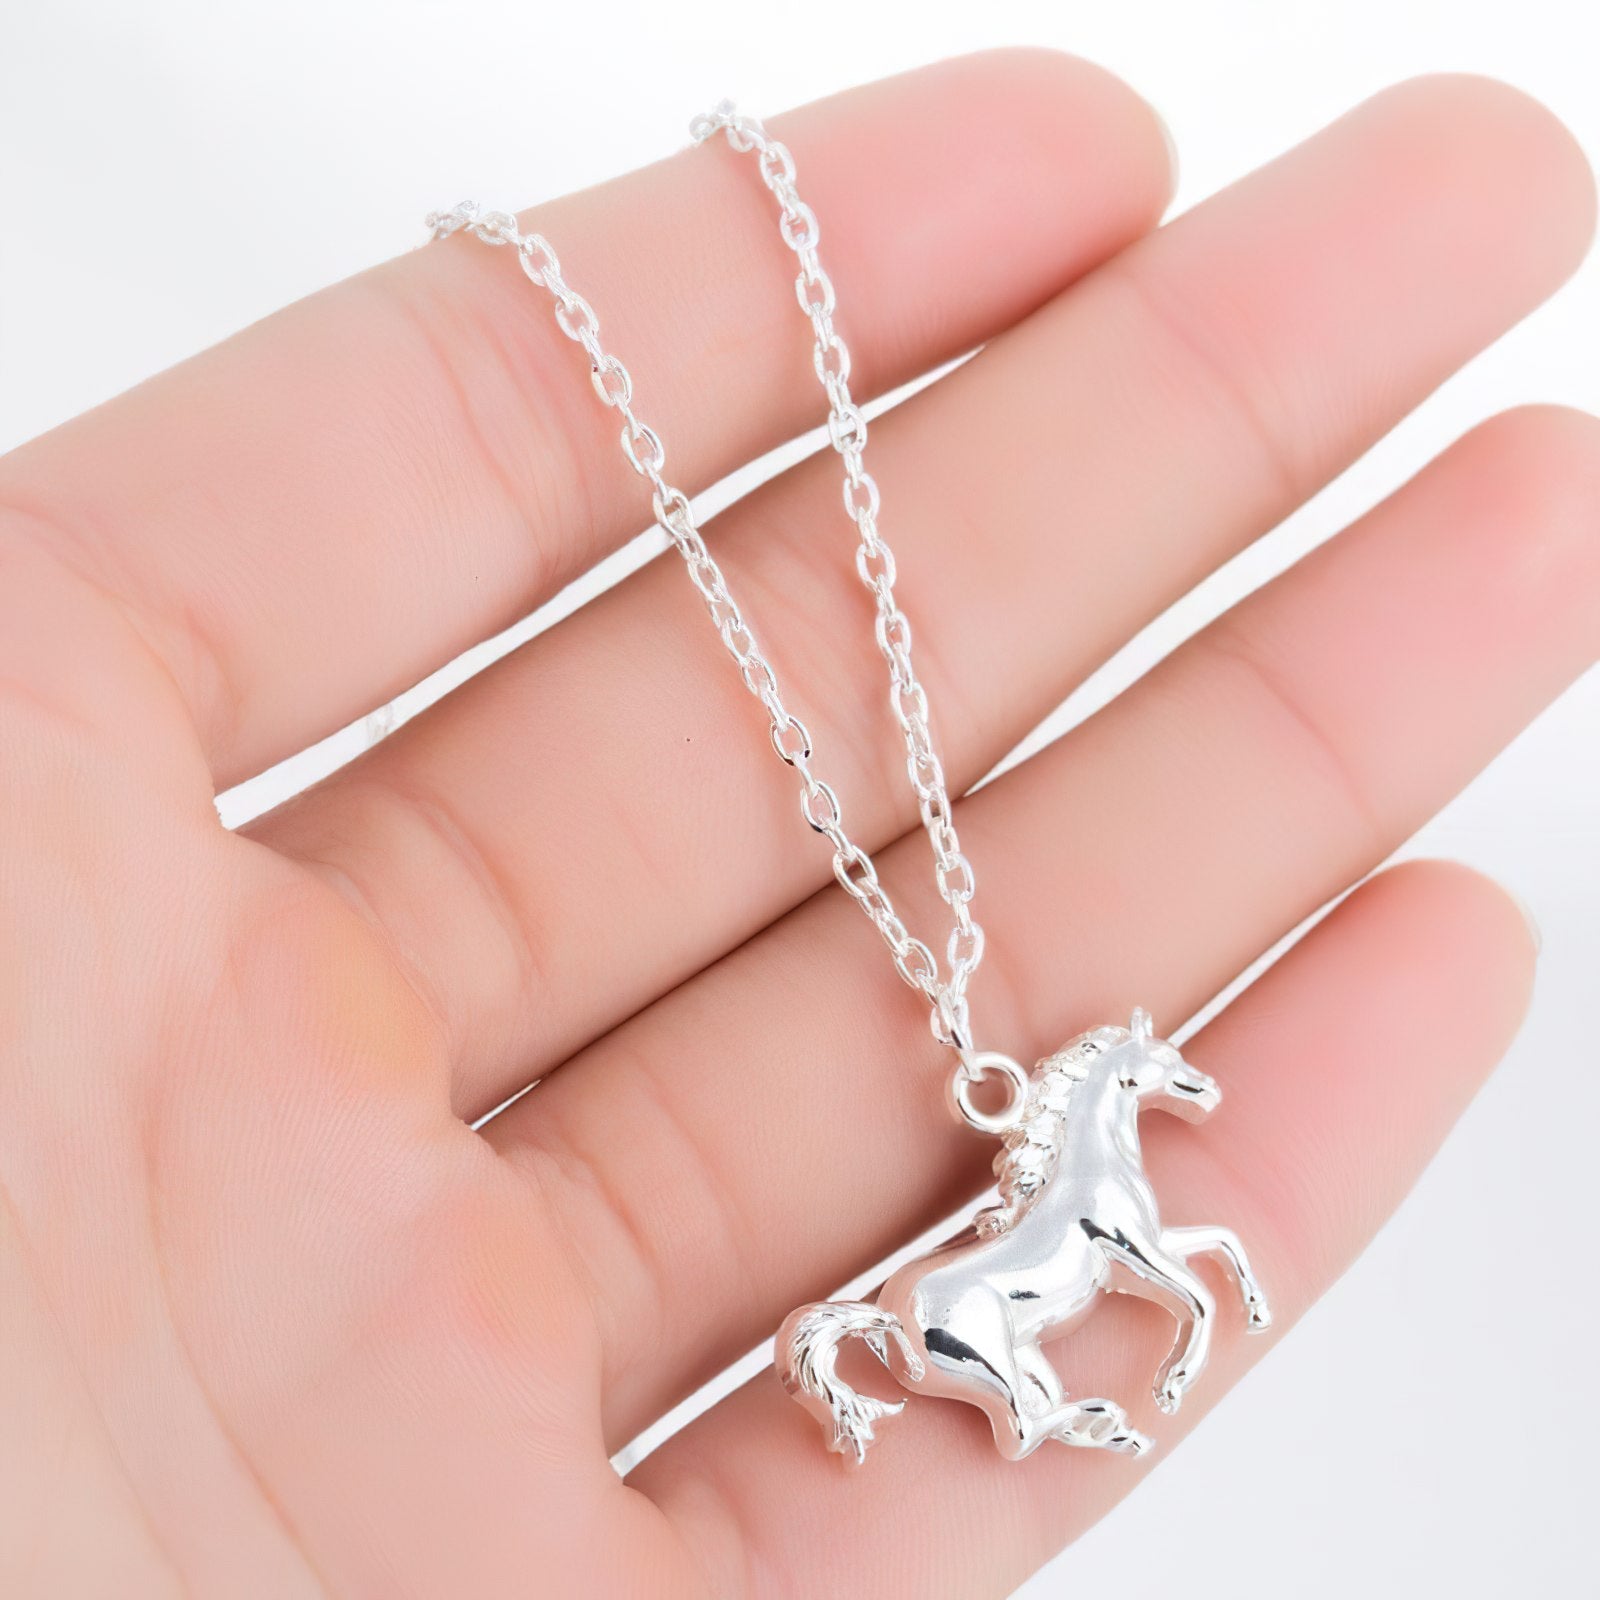 Metal racehorse necklaces for women